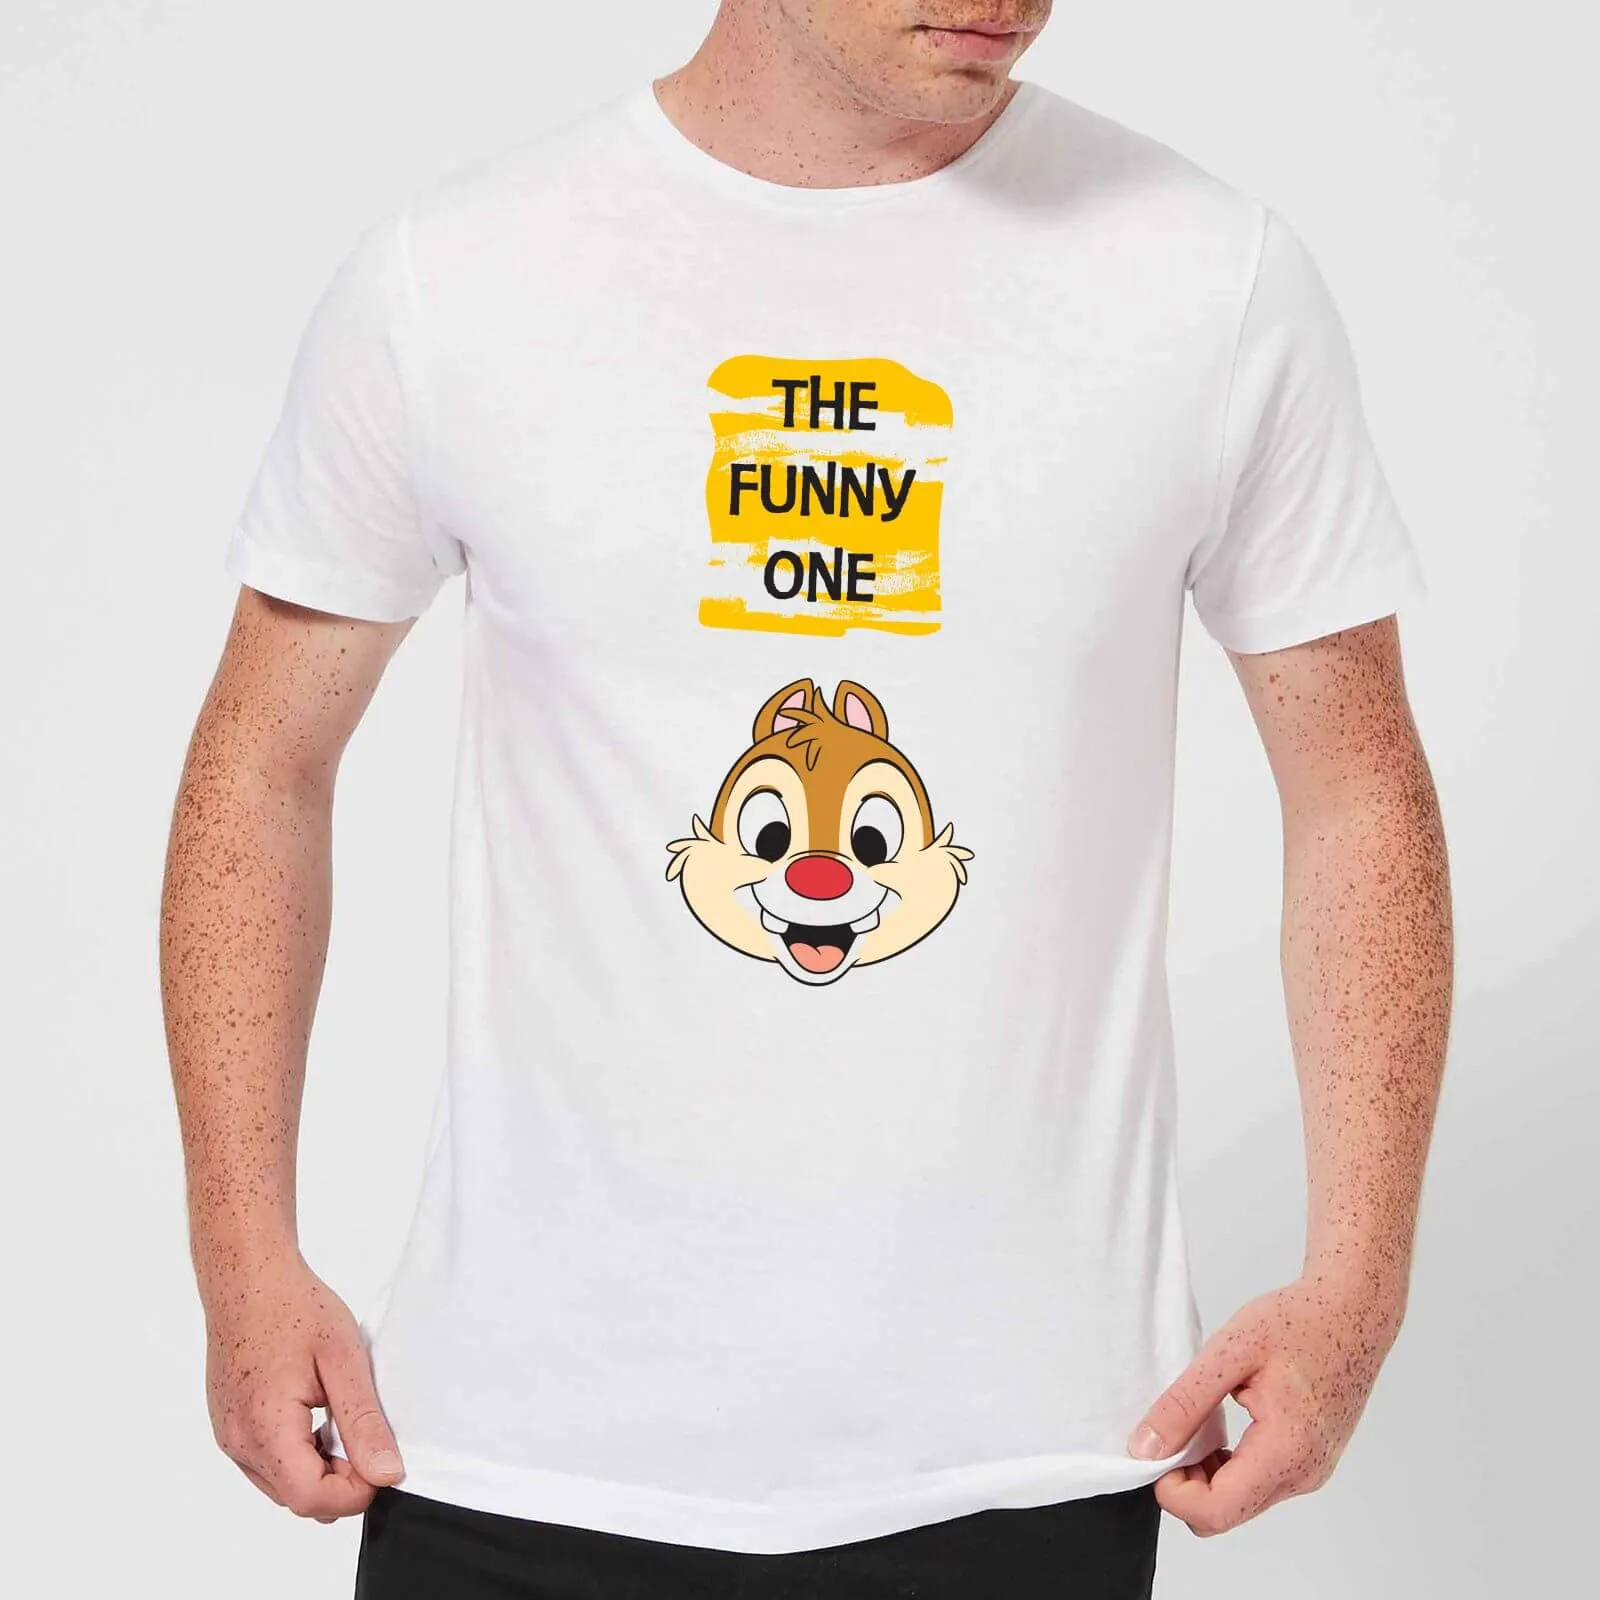  Chip 'N' Dale The Funny One Men's T-Shirt - White - XL